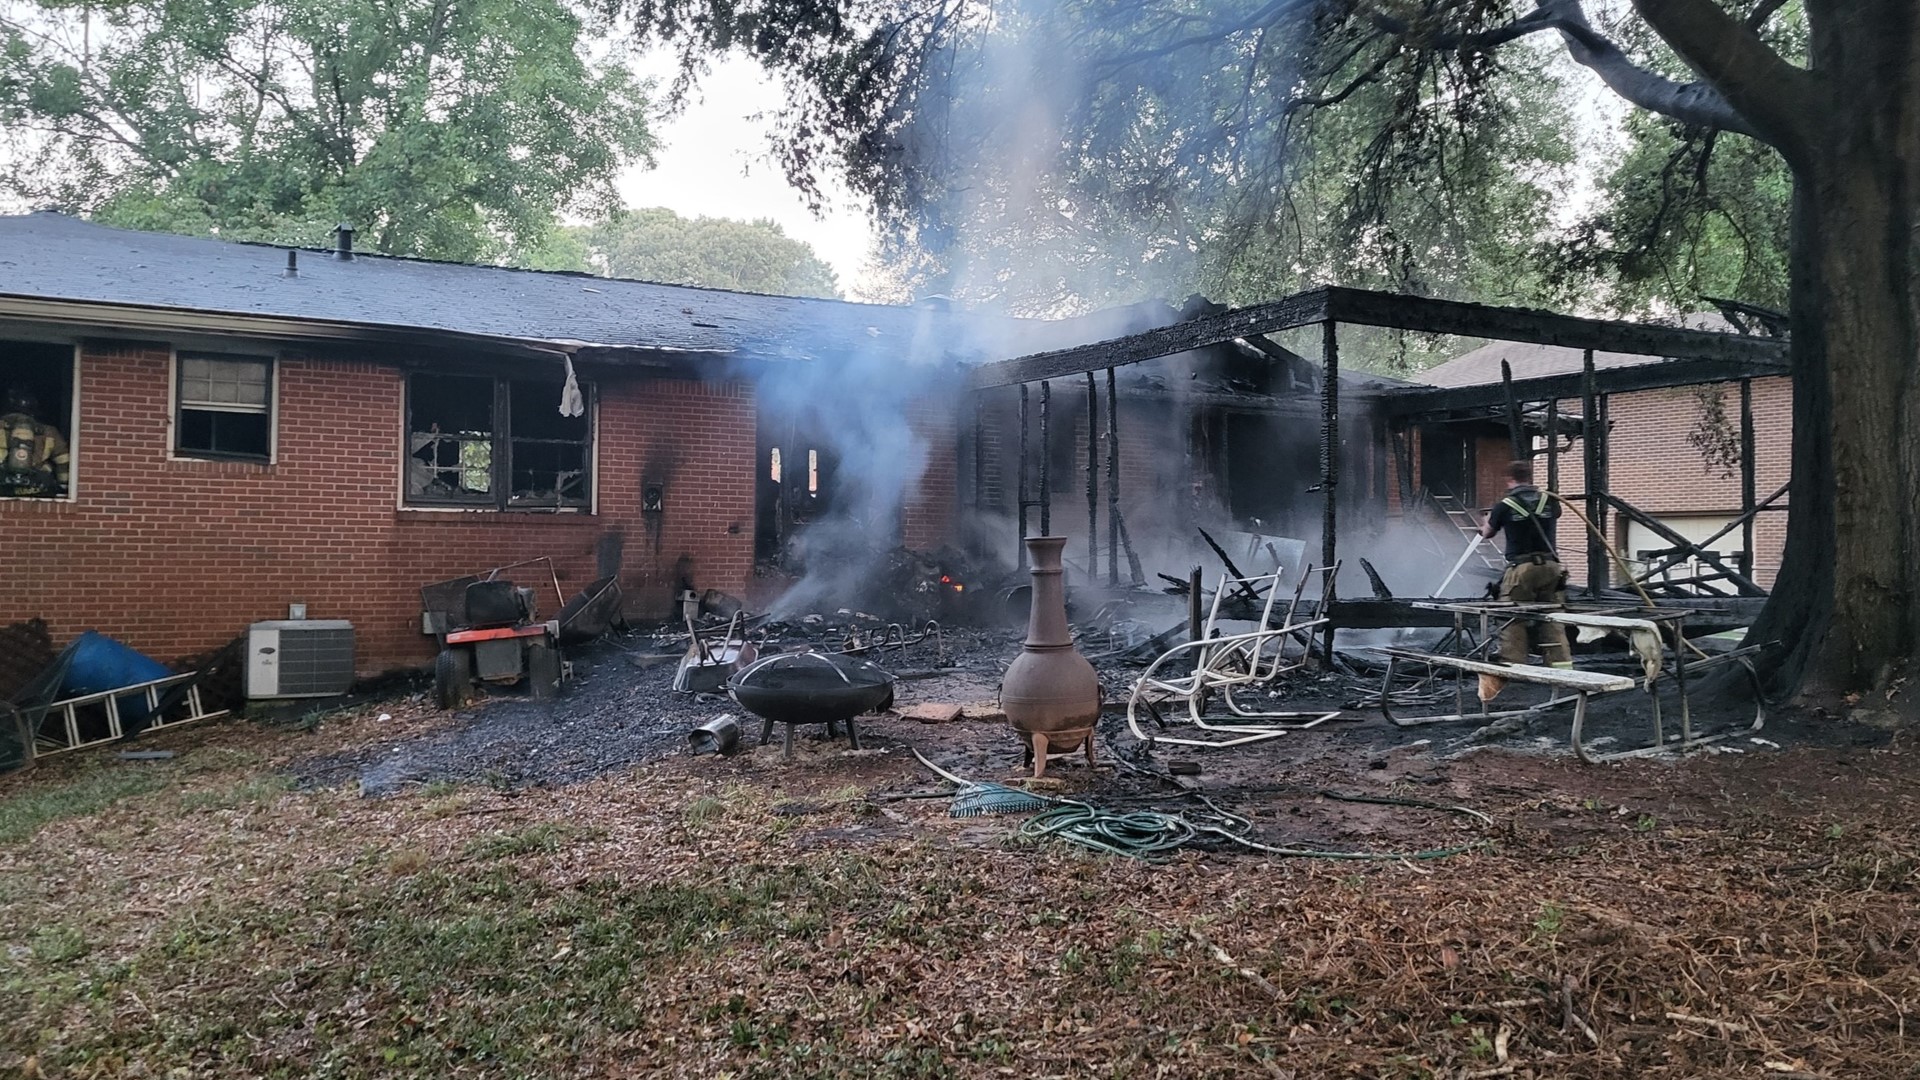 Gwinnett County Fire officials said crews responded at 6:16 a.m. to a home at the 1000 block of Tumble Wood Trail.